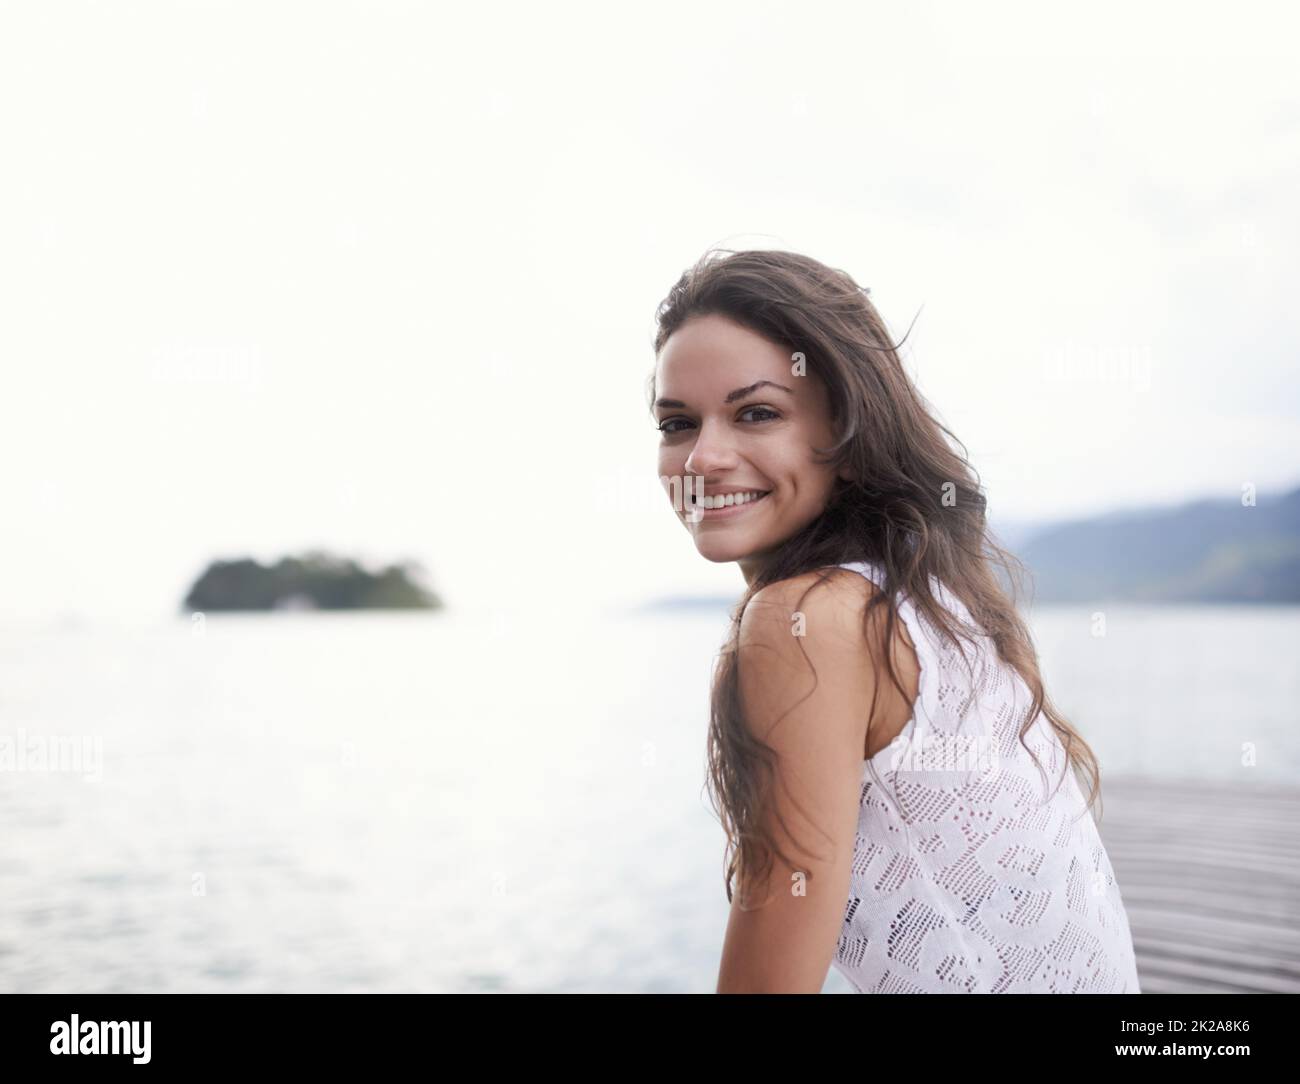 Taking the time out to focus on me. Portrait of an attractive young woman sitting on a jetty by the lake. Stock Photo